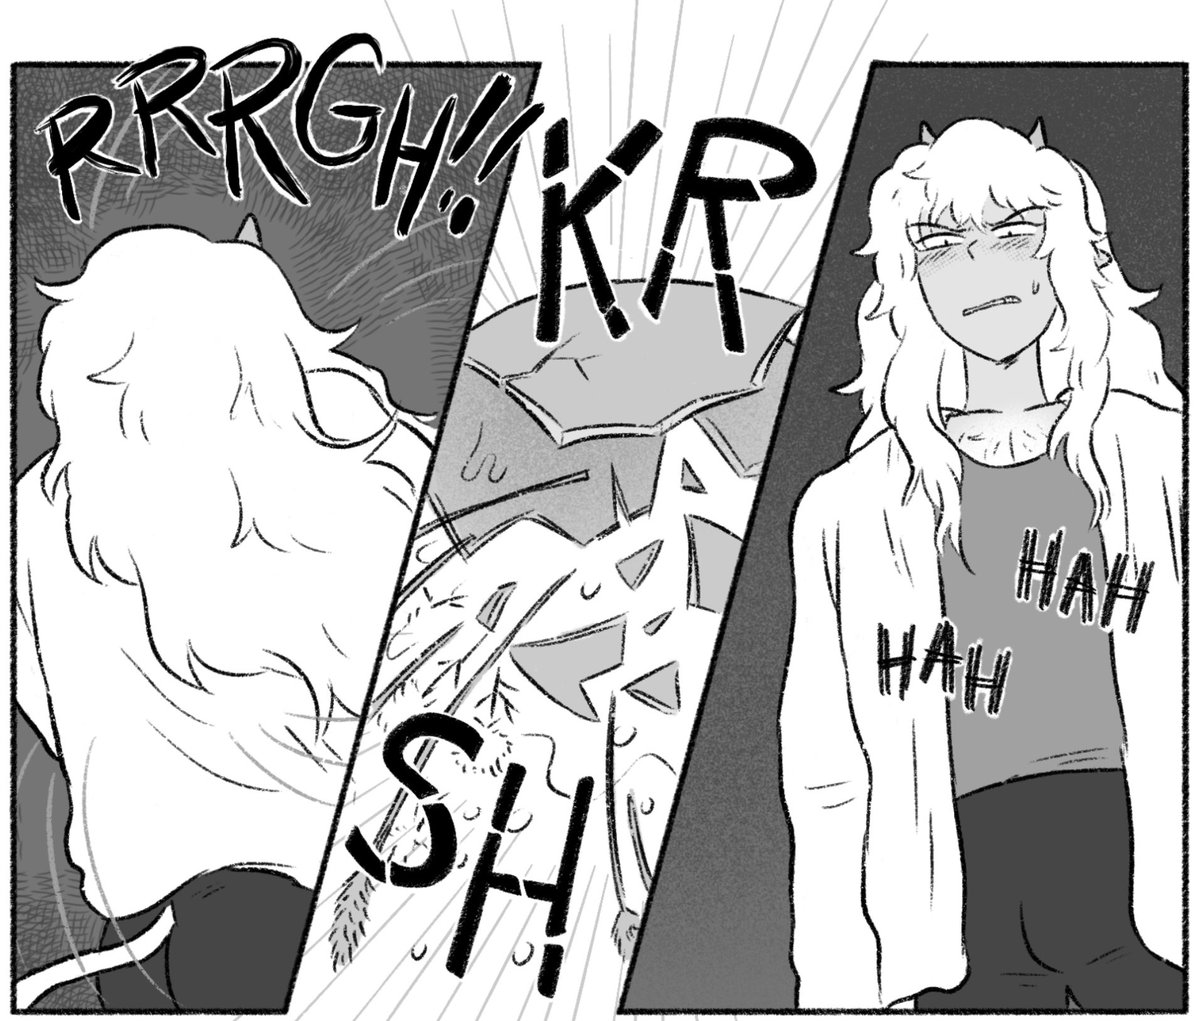 ✨Page 430 of Sparks is up!✨
All these boys have such healthy coping mechanisms 

✨https://t.co/fXb57ku80q
✨Tapas https://t.co/gloRTLqkRj
✨Support & read 100+ pages ahead https://t.co/Pkf9mTOqIX 